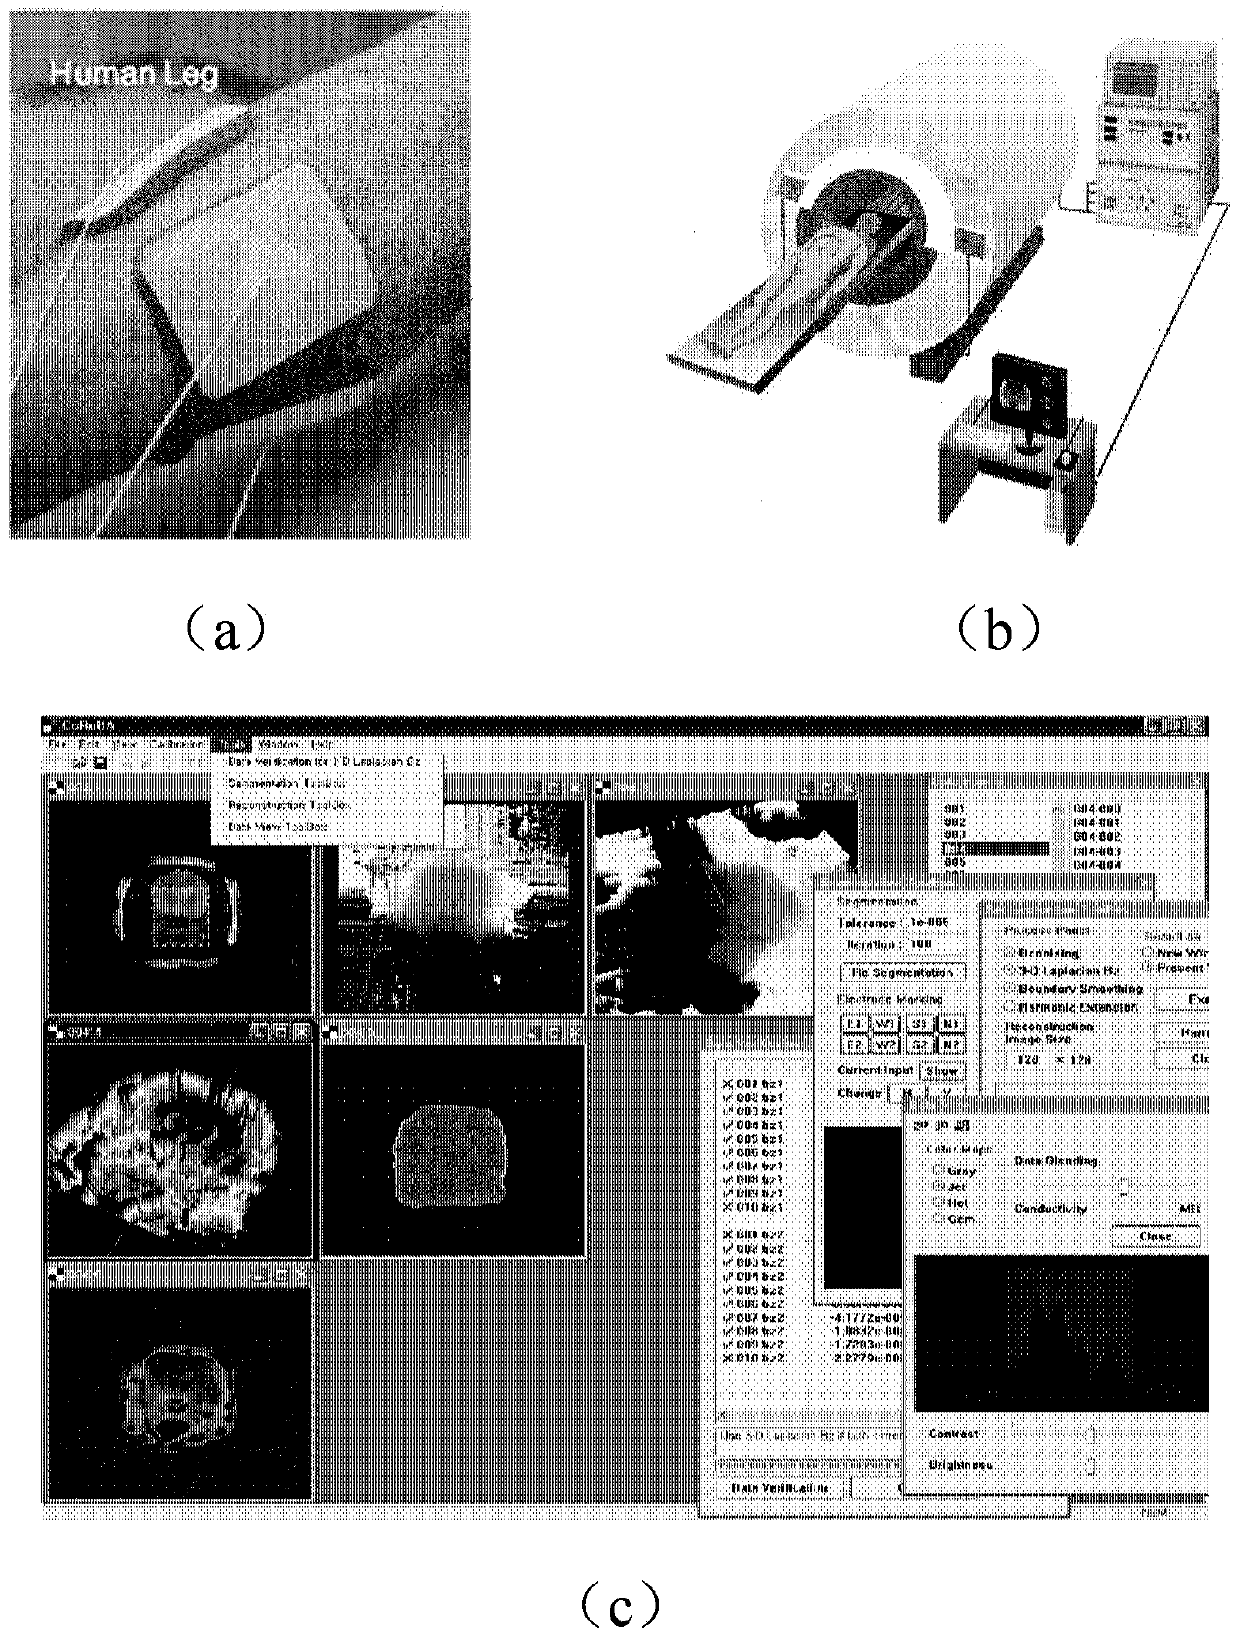 Microcosmic electrical impedance imaging device and method based on diamond NV color center